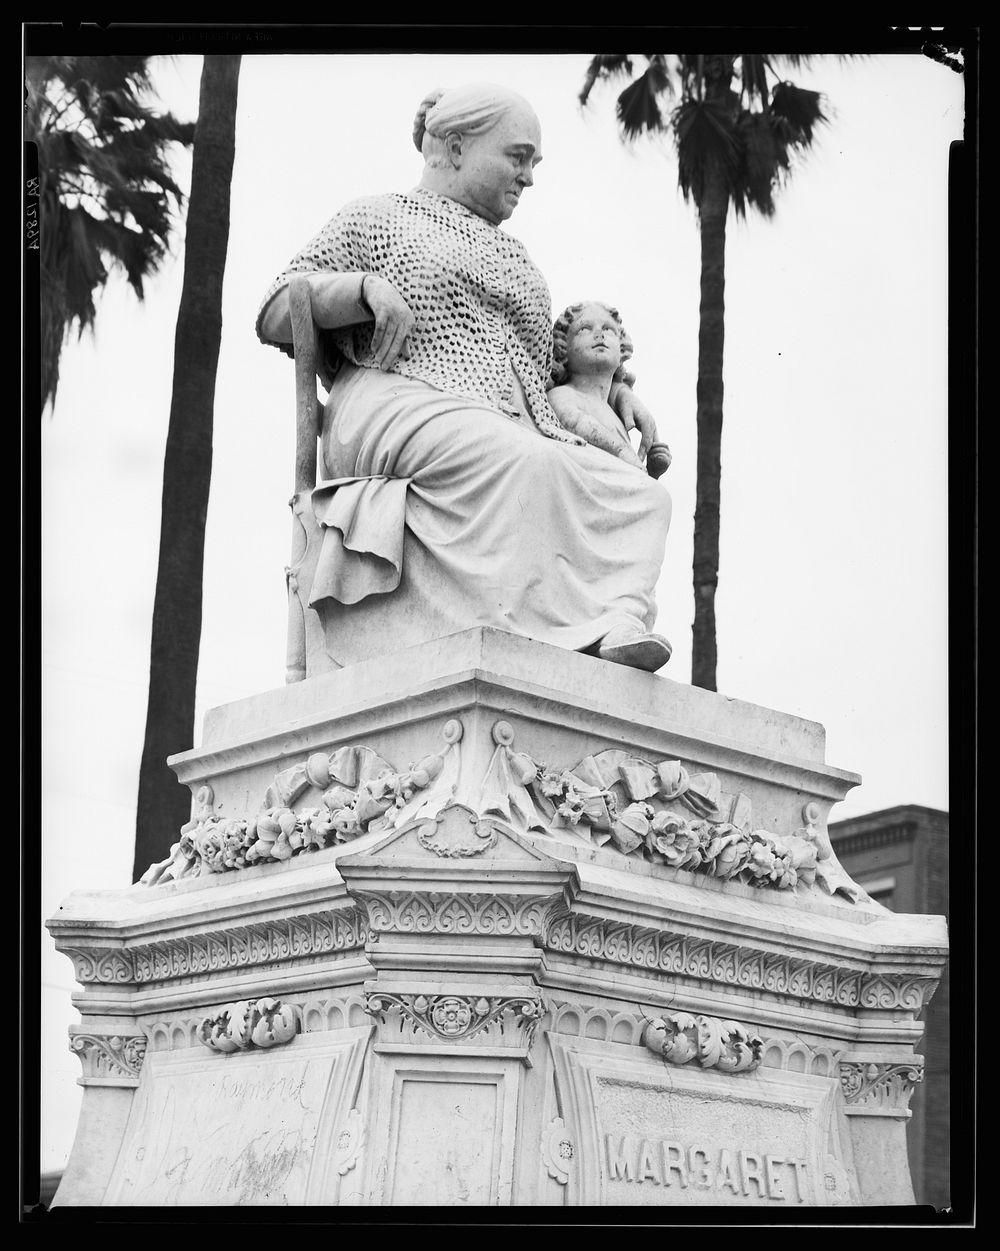 The Margaret statue. New Orleans Victorian monument. Louisiana. Sourced from the Library of Congress.